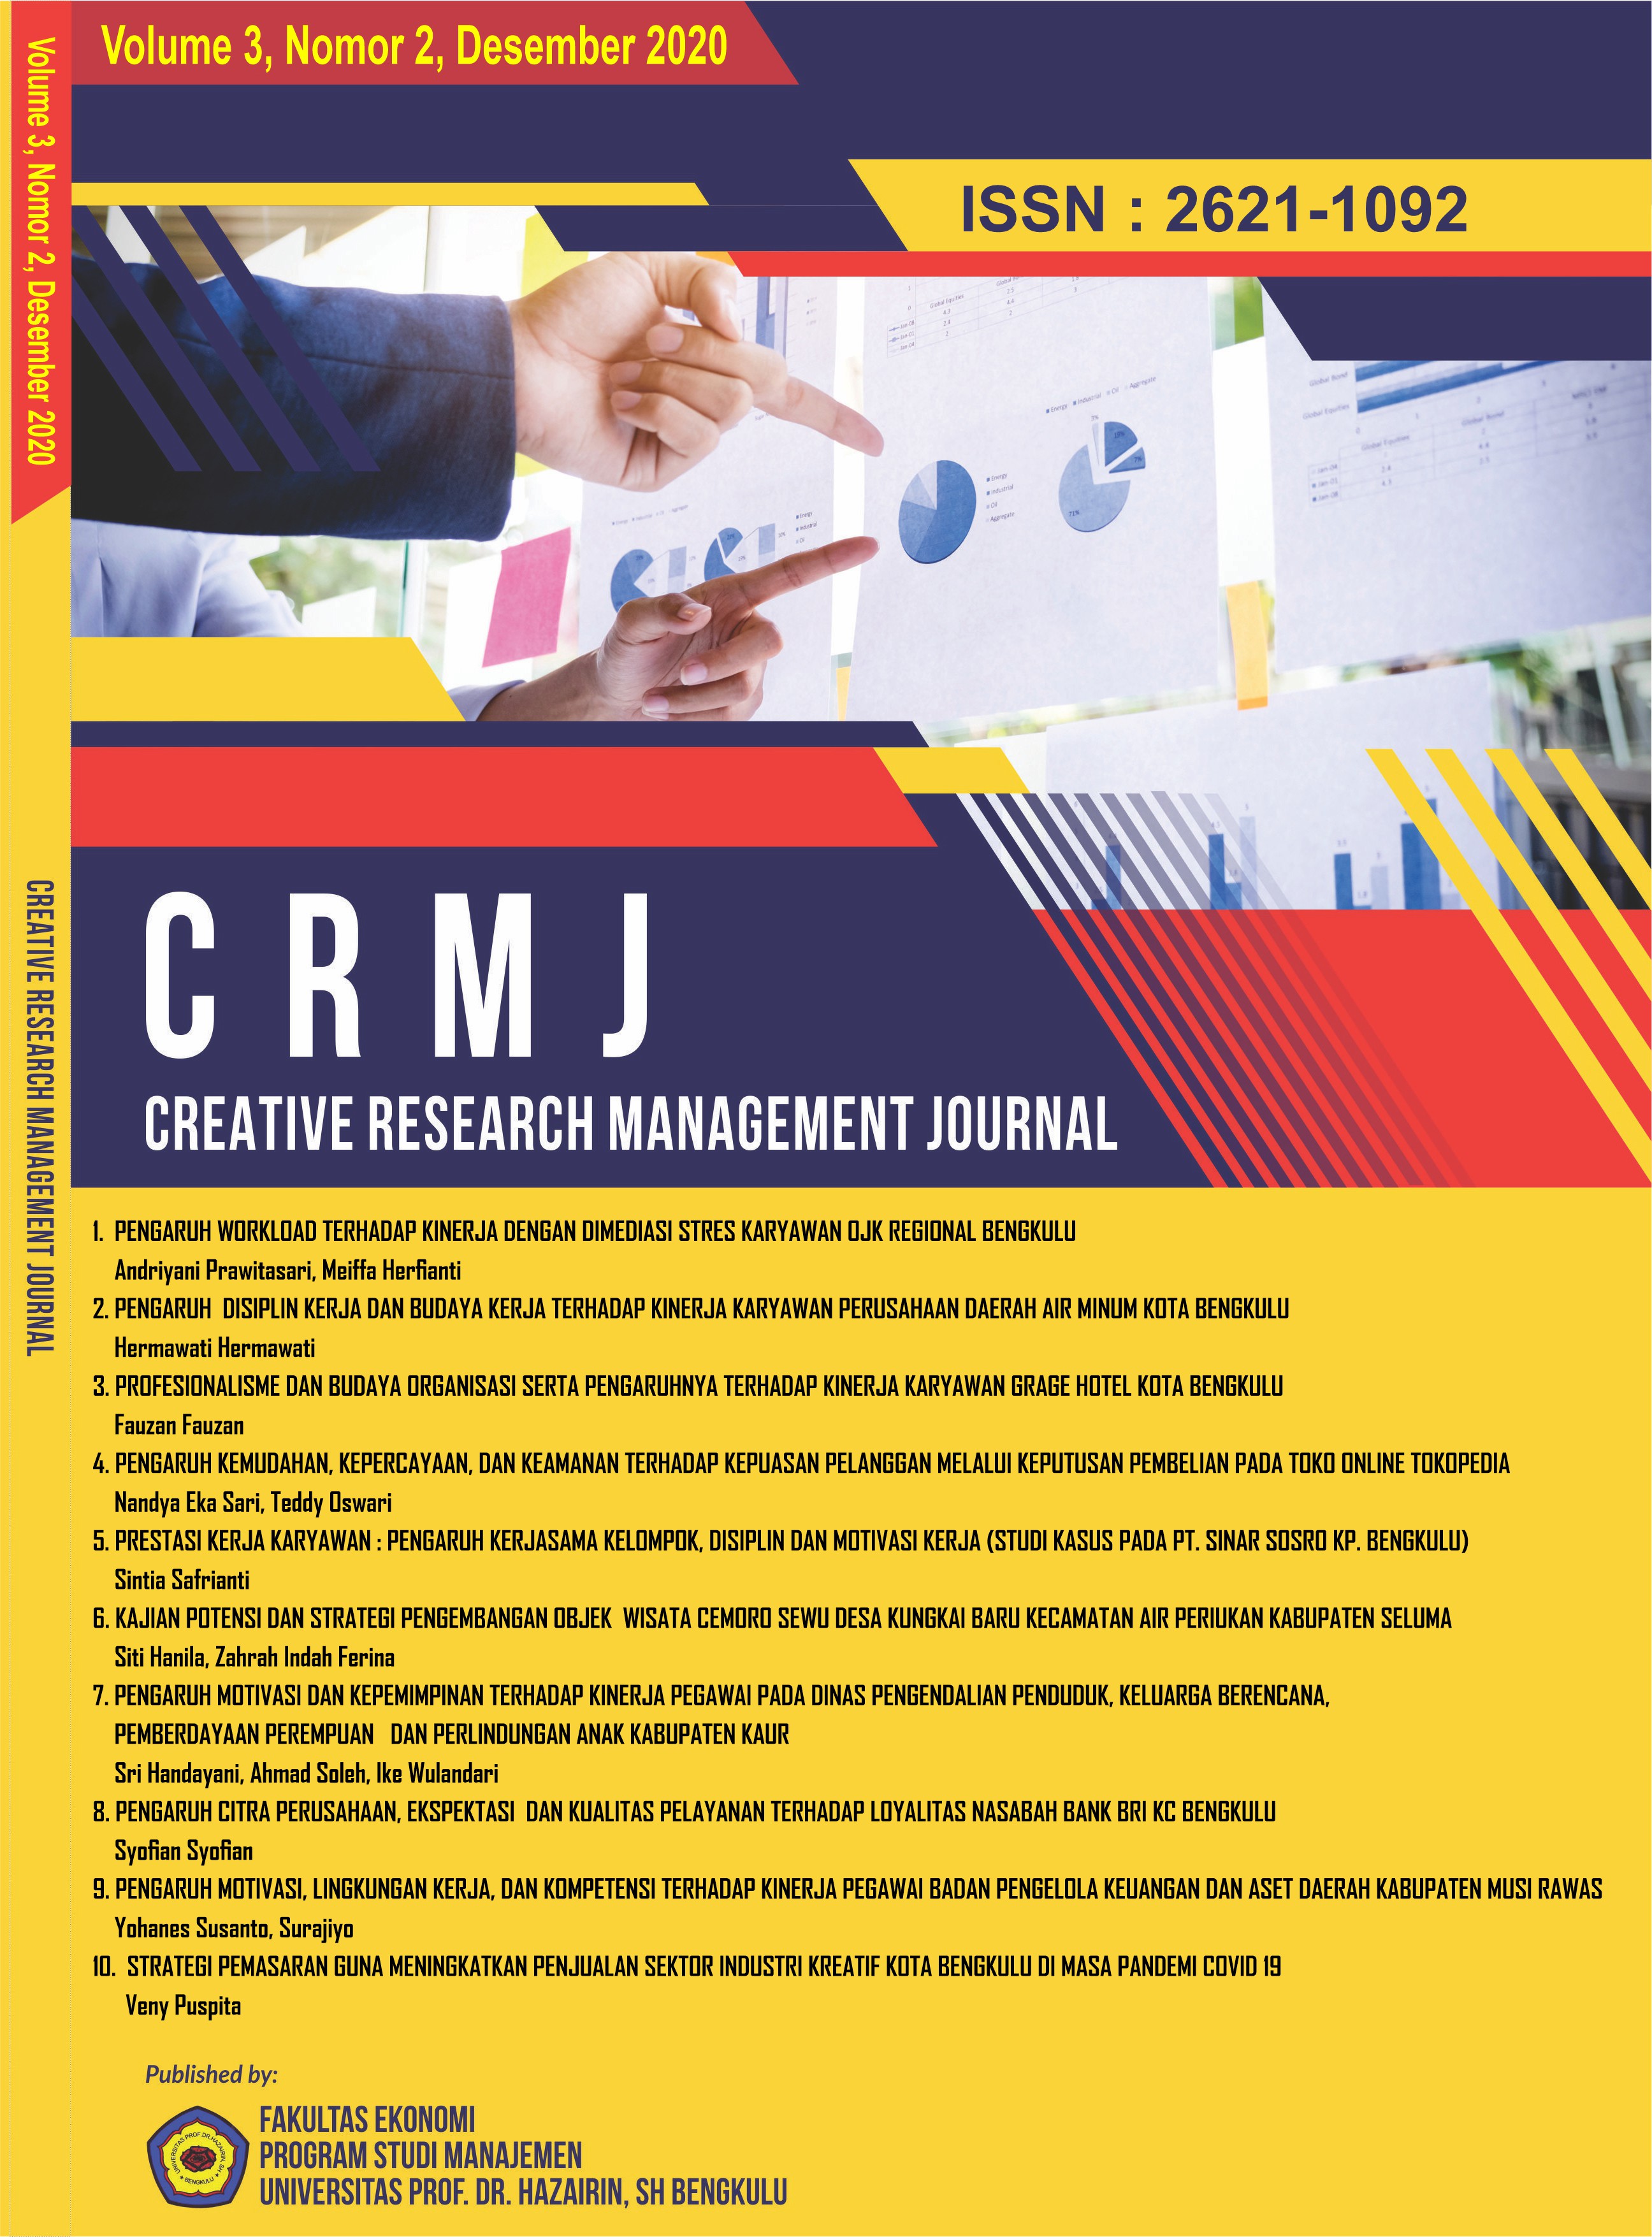 creative research management journal